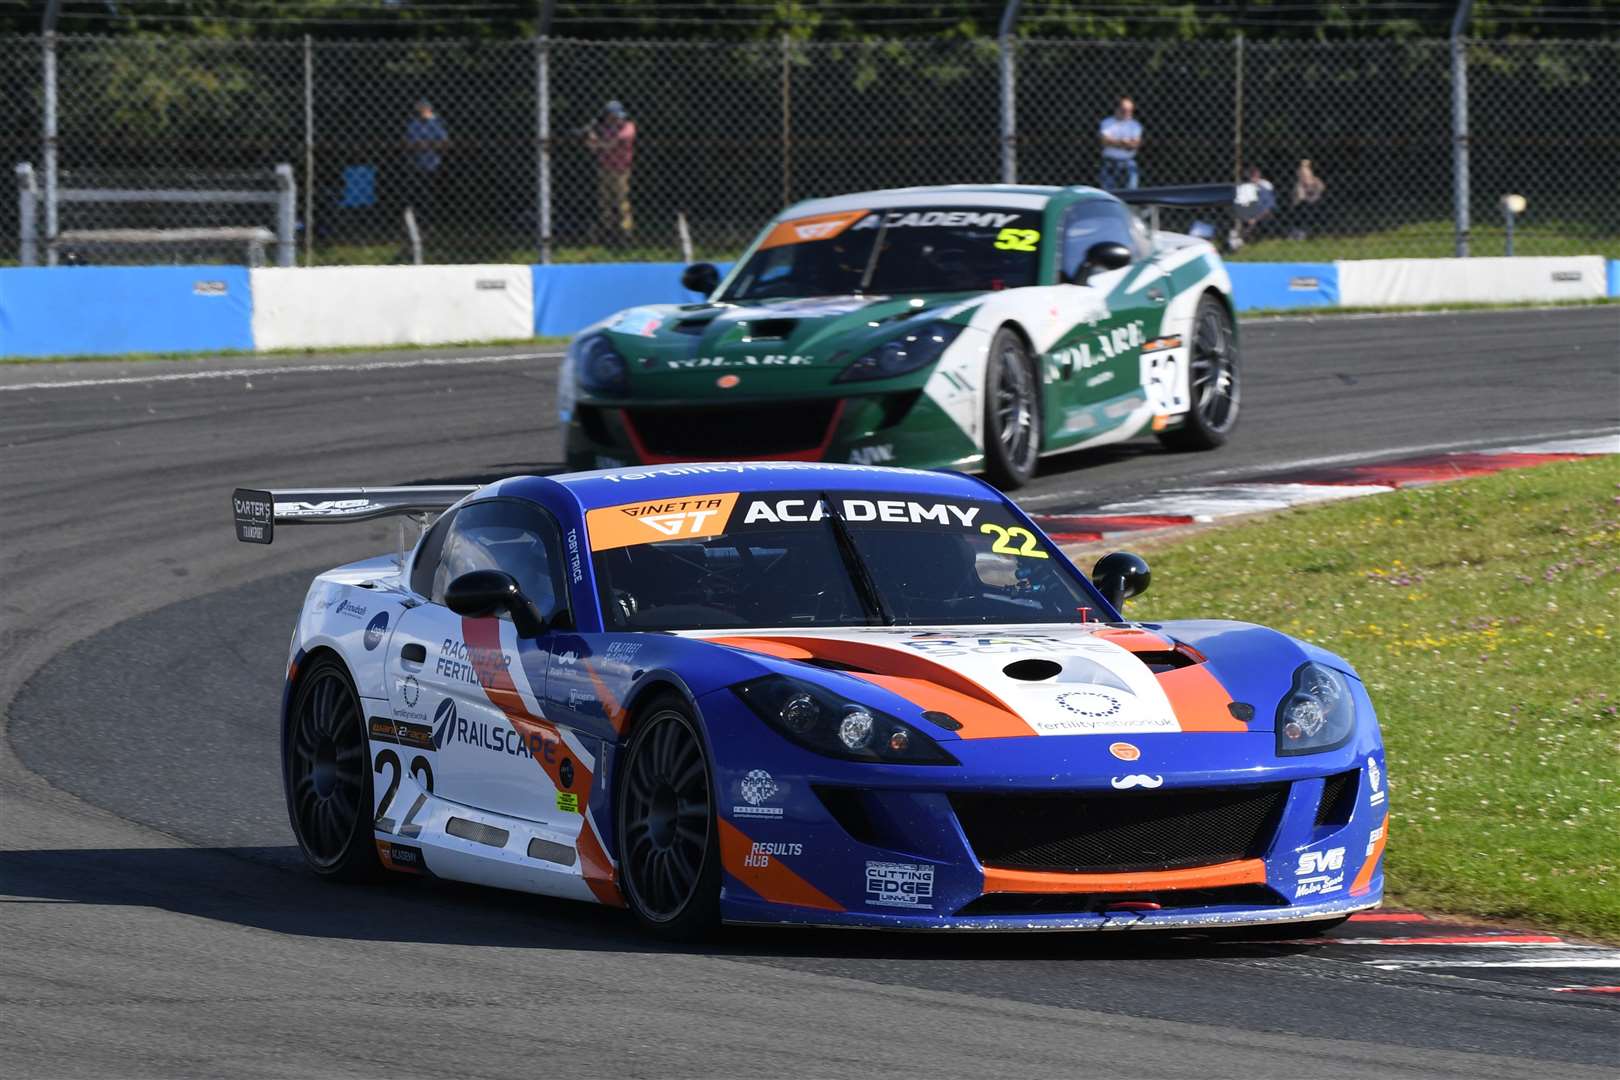 Toby Trice winning in the Ginetta GT Academy at Donington Park Picture: tobytriceracing.com.